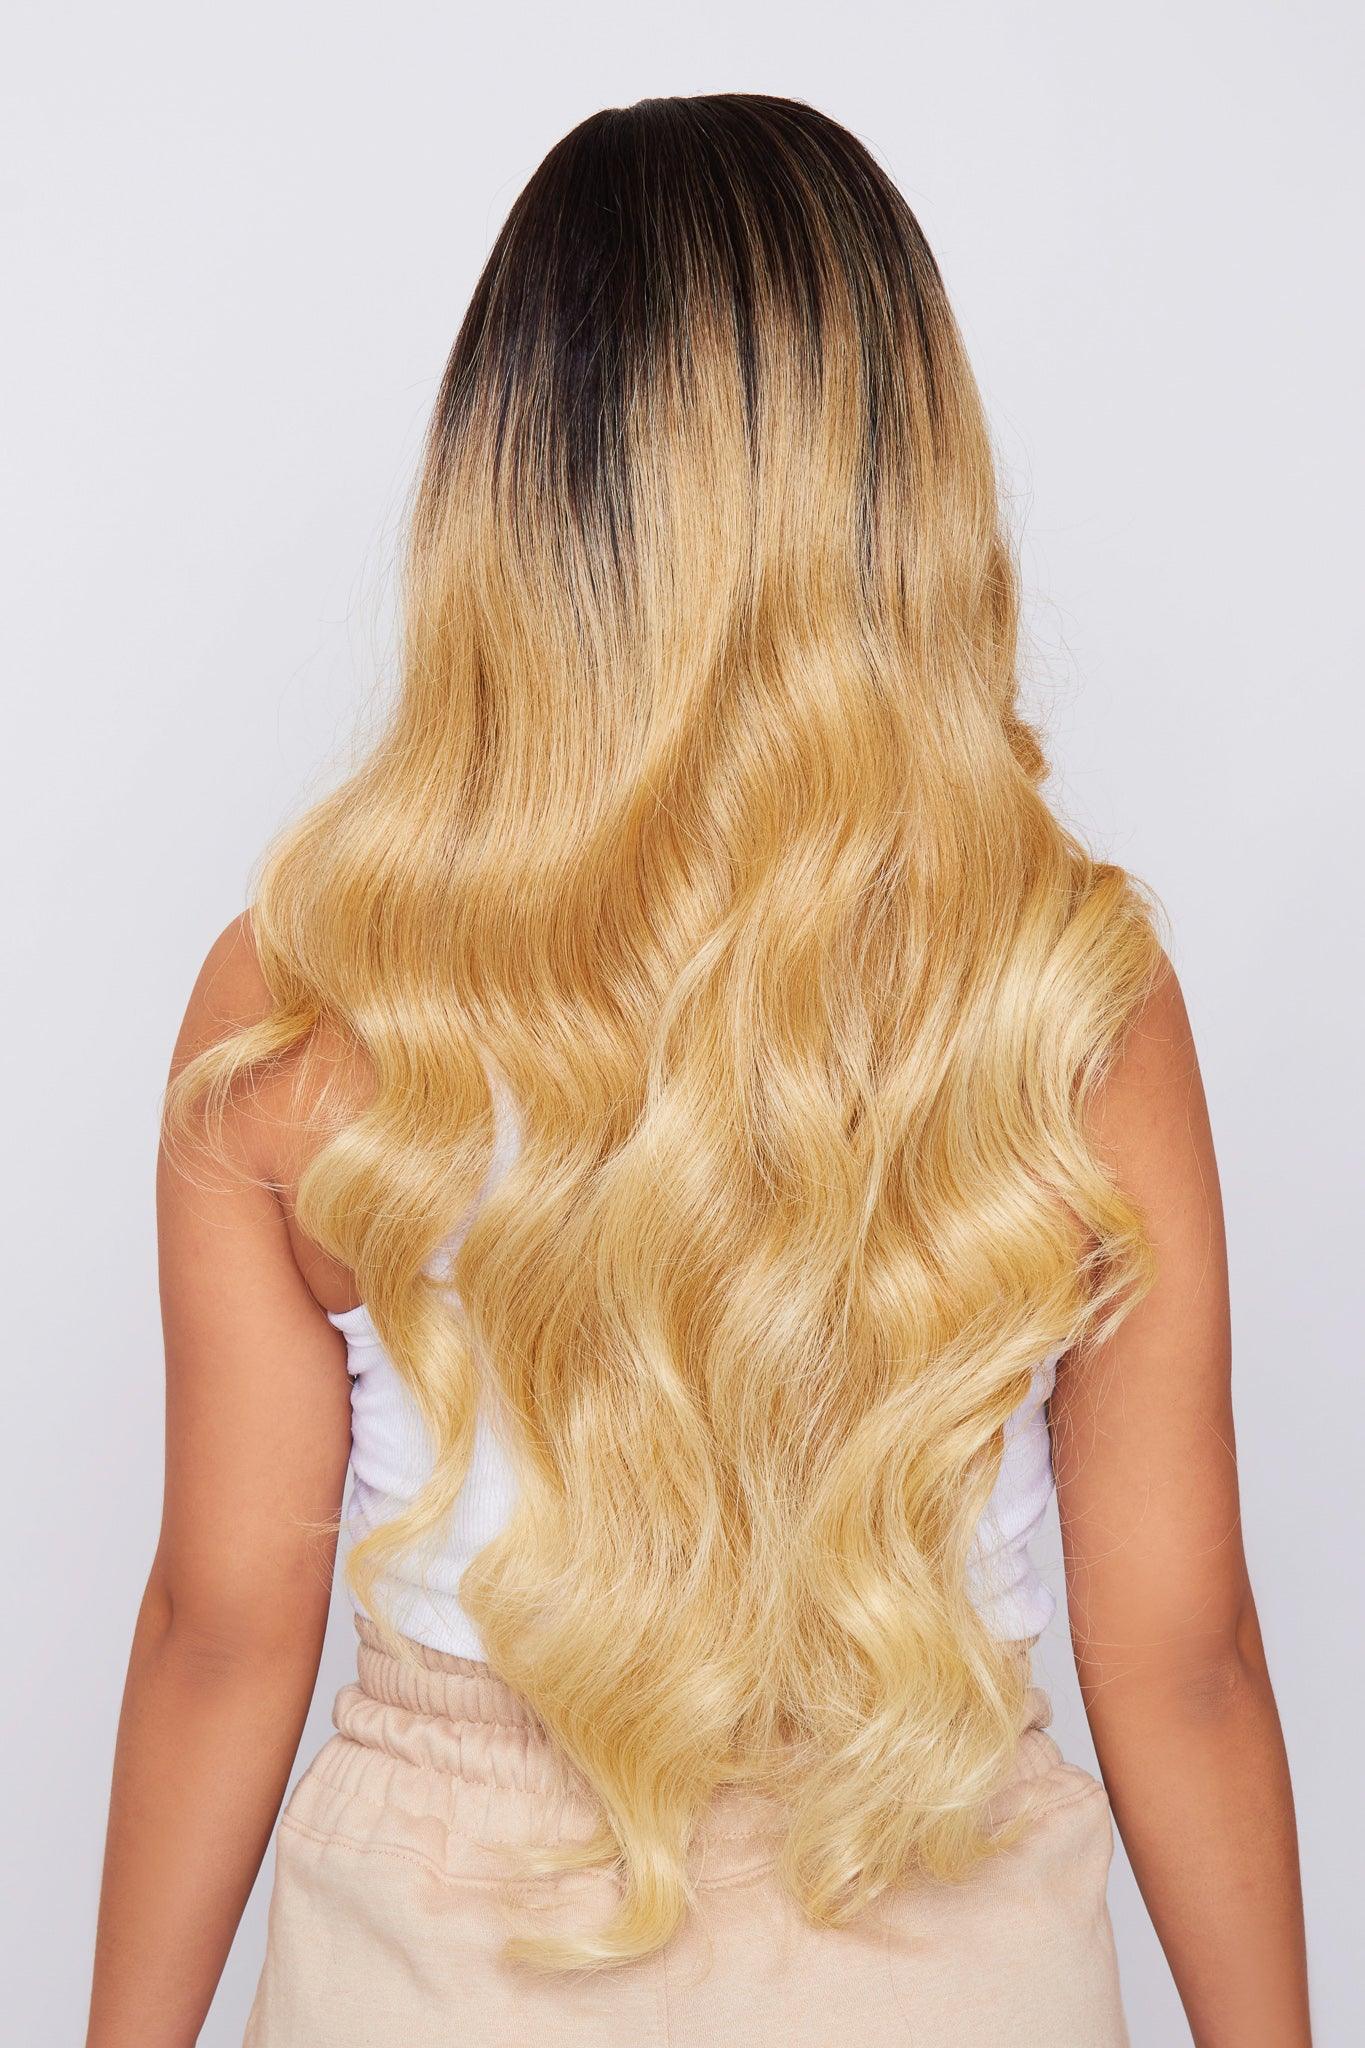 beautiful ombre blonde long wavy wig being worn by model from hair brand pbeauty hair